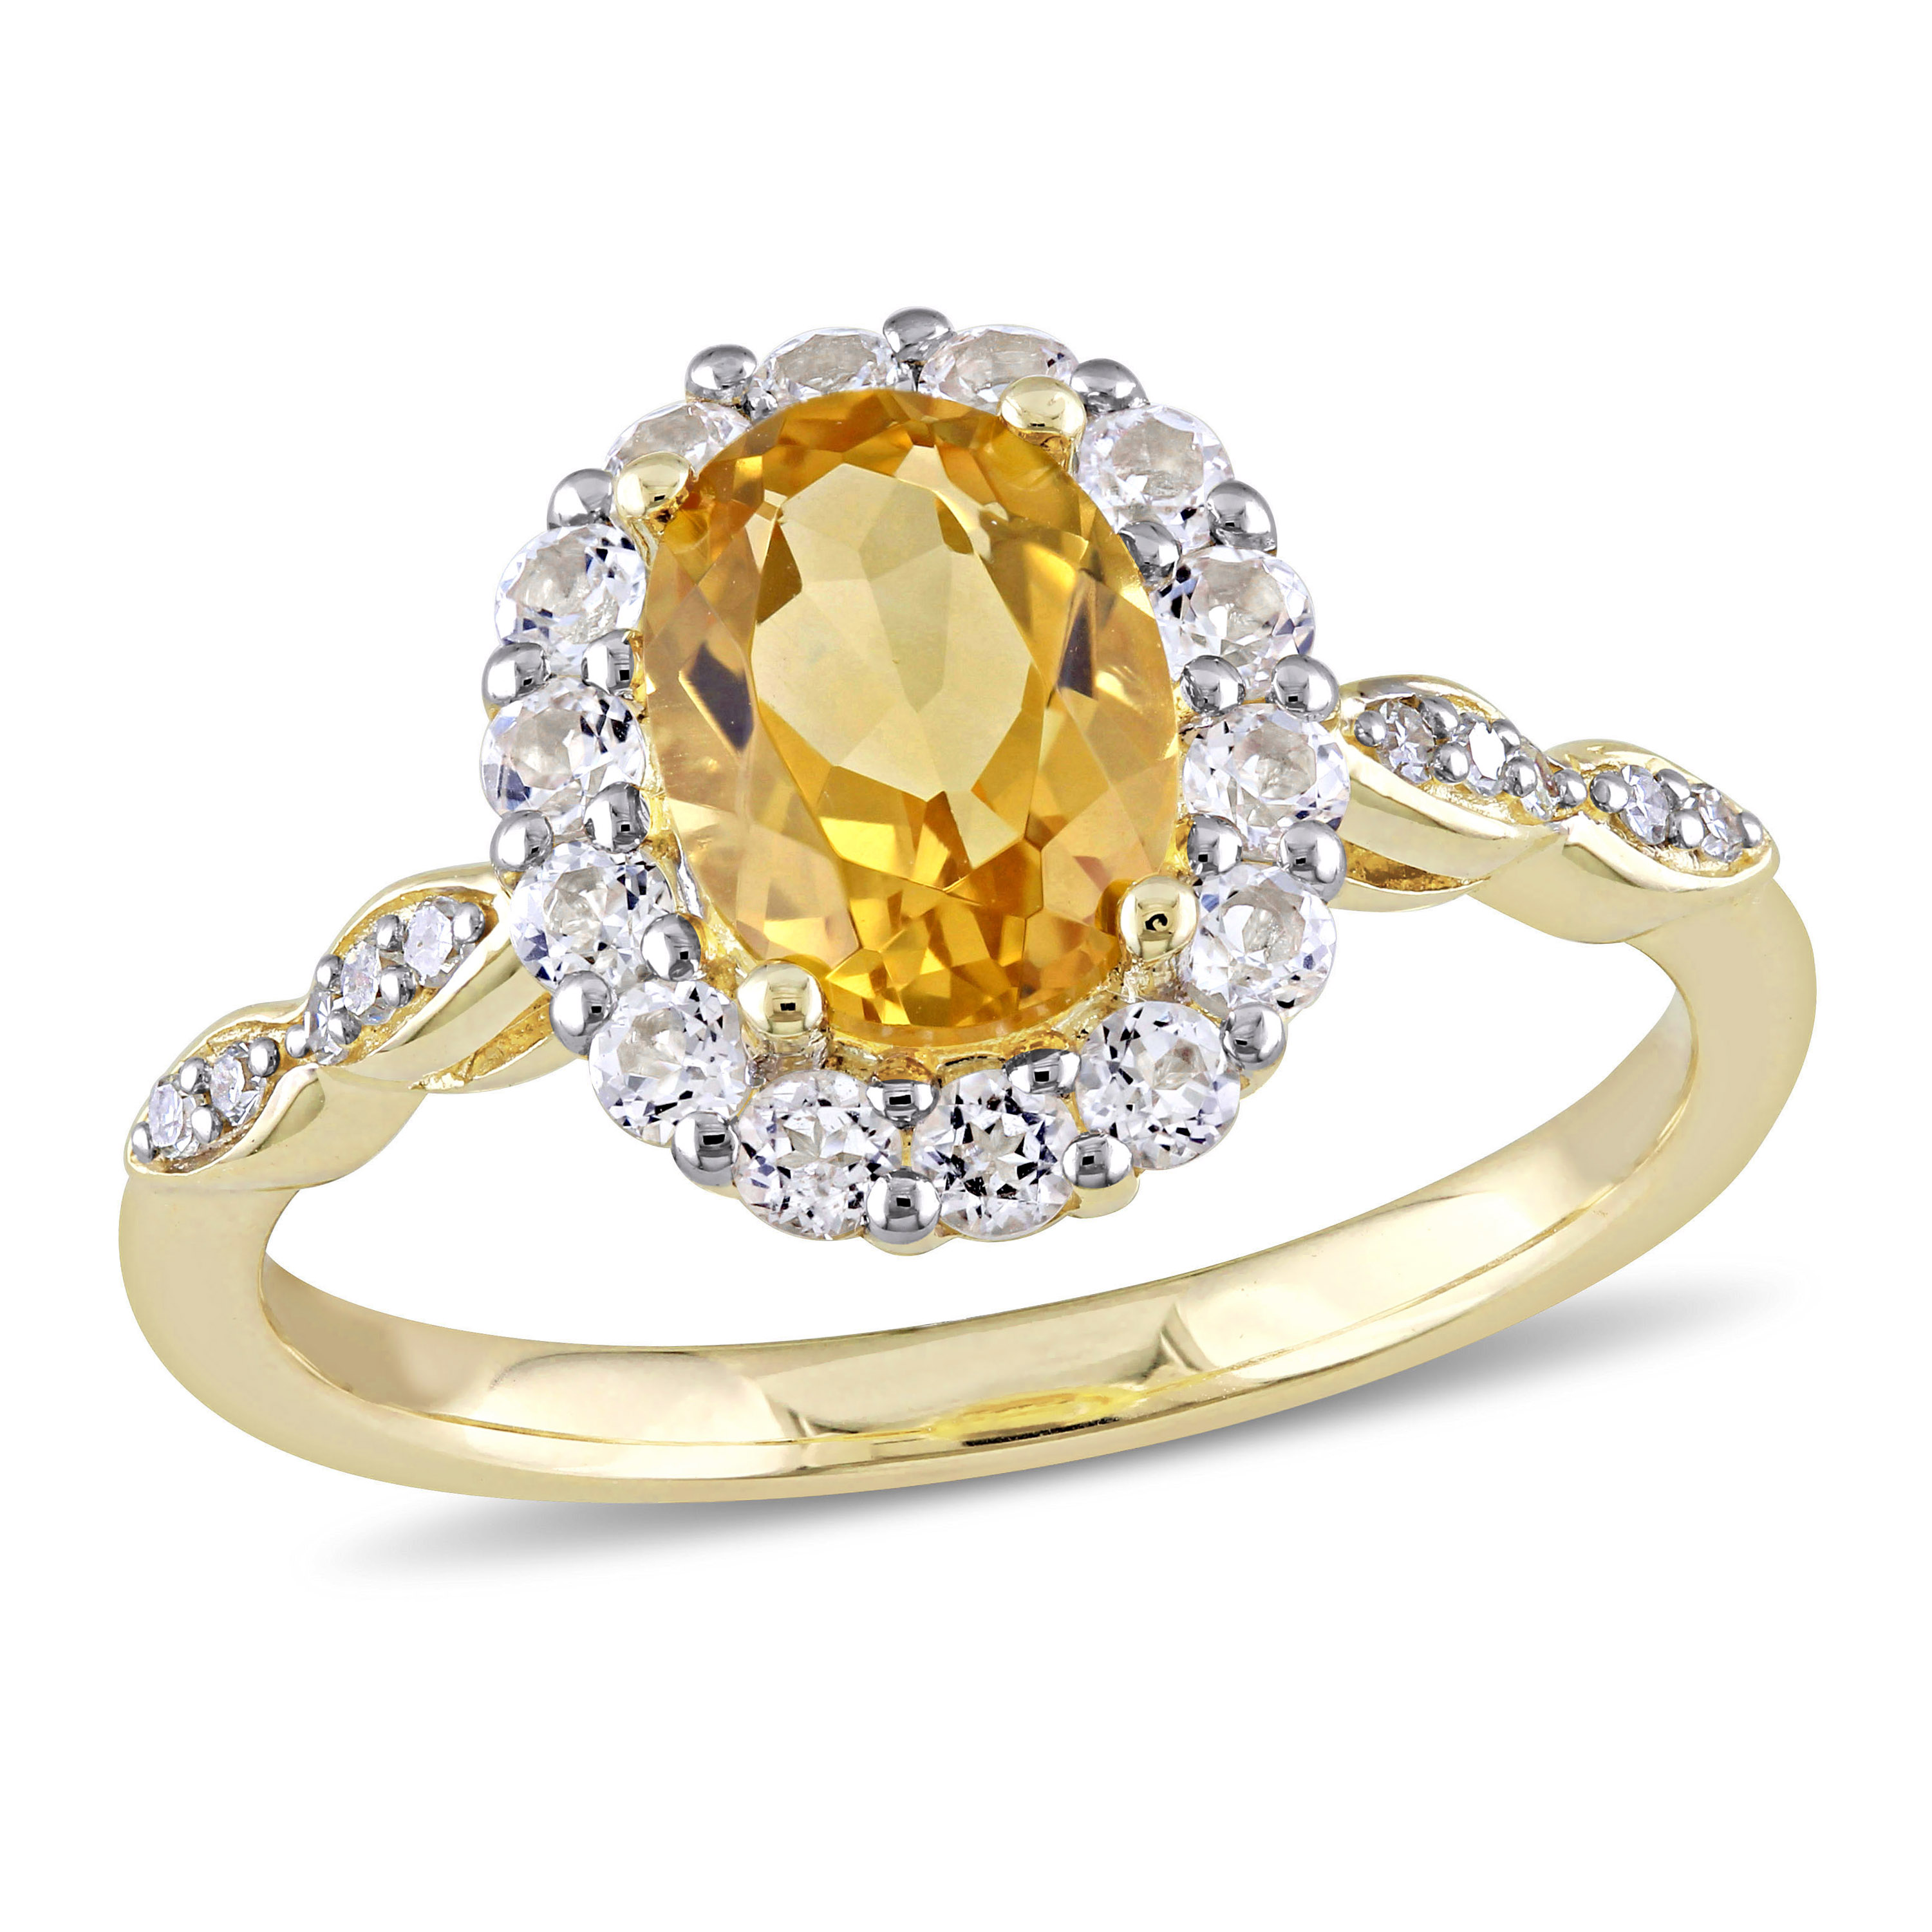 Oval Shape Citrine, White Topaz and Diamond Accent Vintage Ring in 14k Yellow Gold